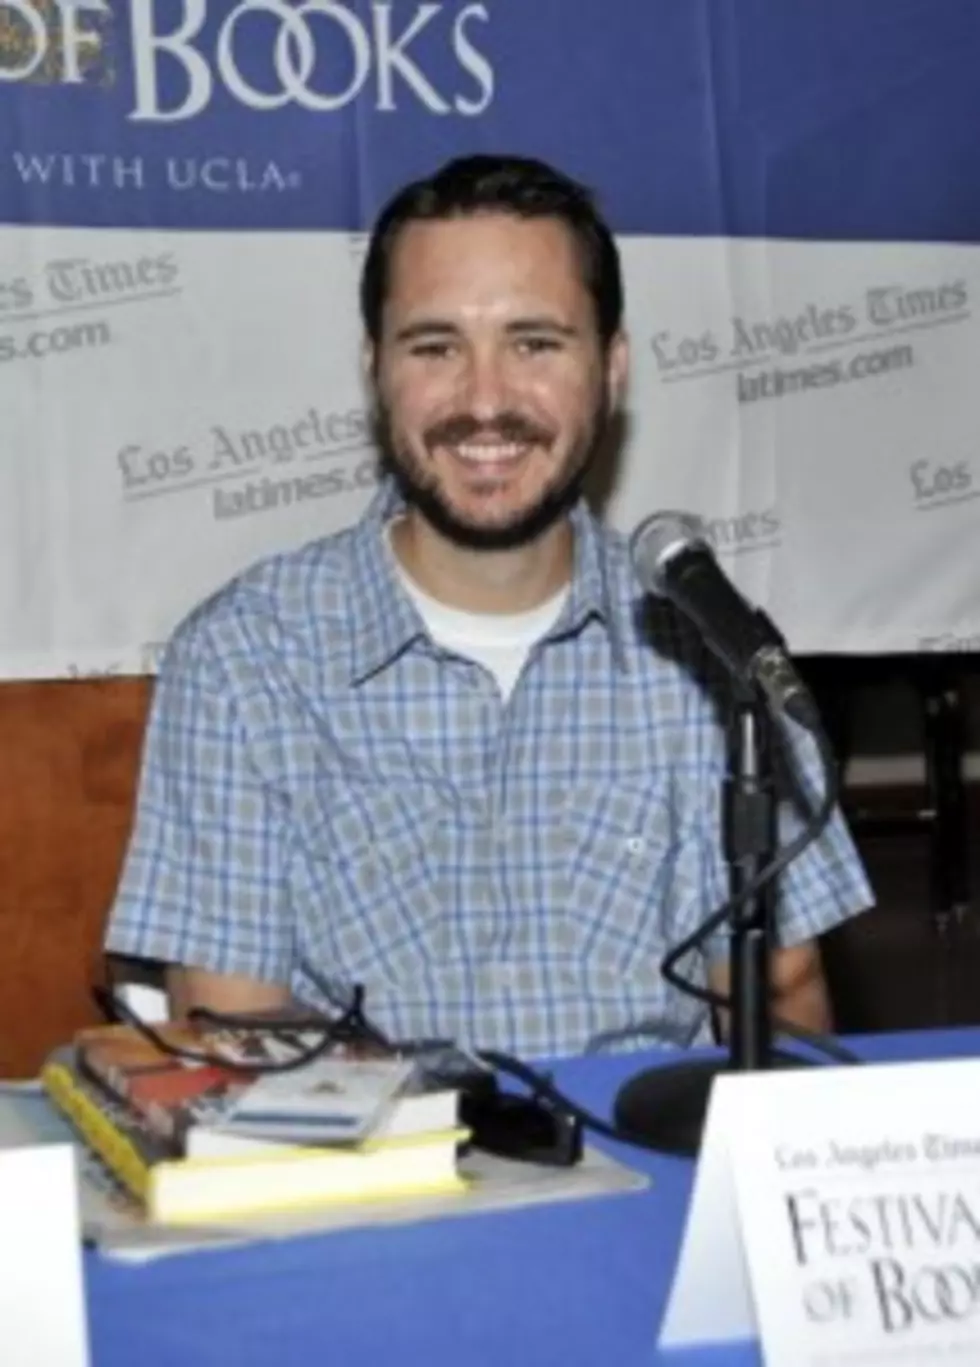 Actor Wil Wheaton Gives A Great Response To A Question About Bullies And Name Calling [VIDEO]